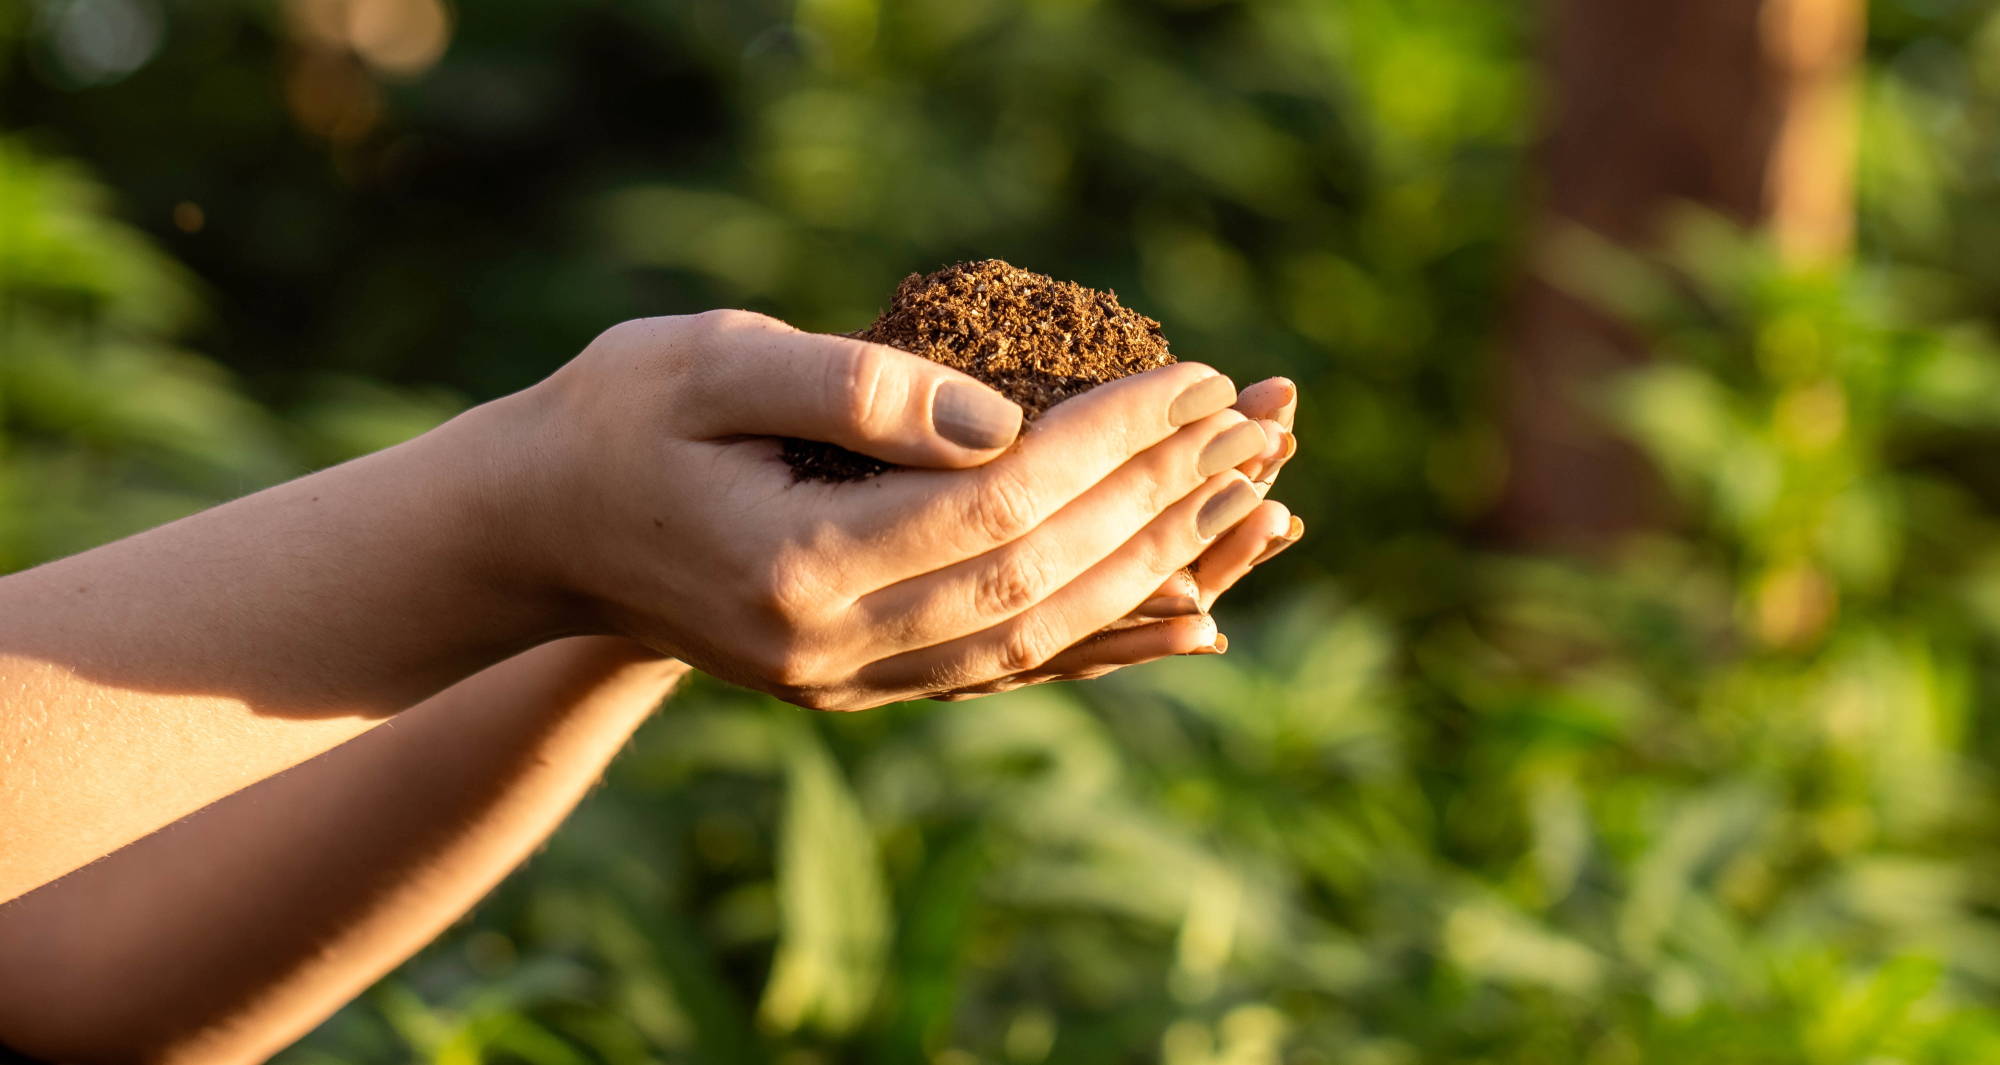 Person holding soil which has produced hemp for hemp fuel.